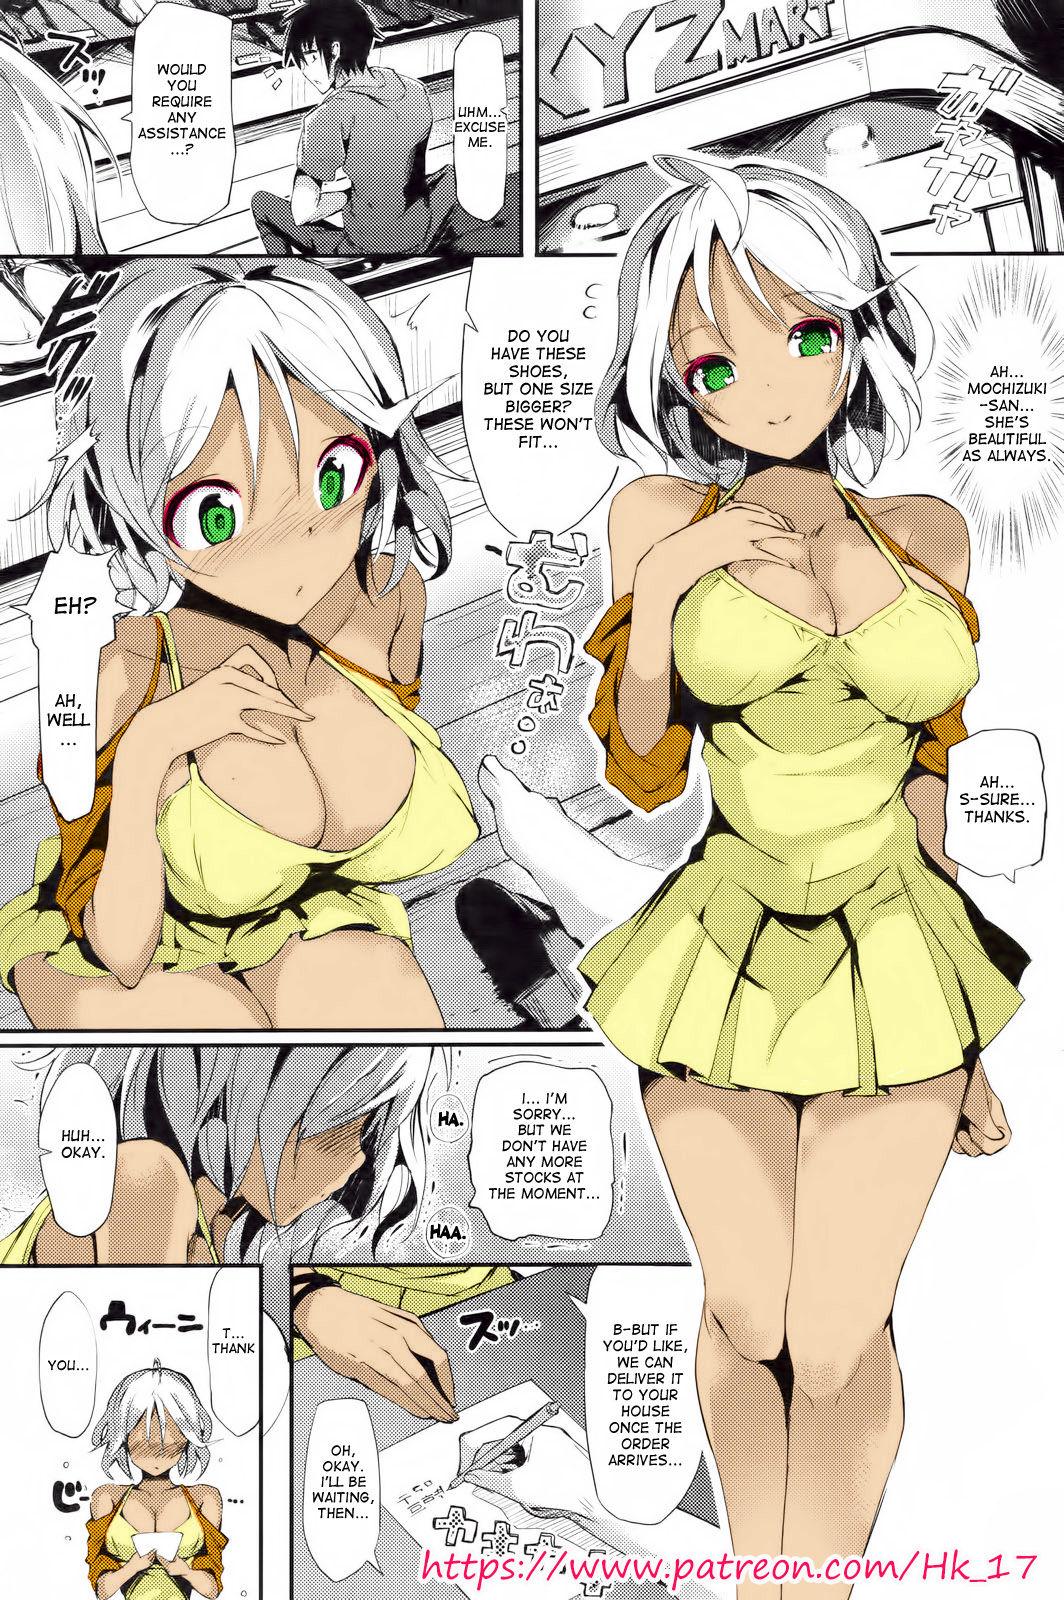 [Patreon] Hk_17 - Lovely Scent - Momi - Full Color [English] 19